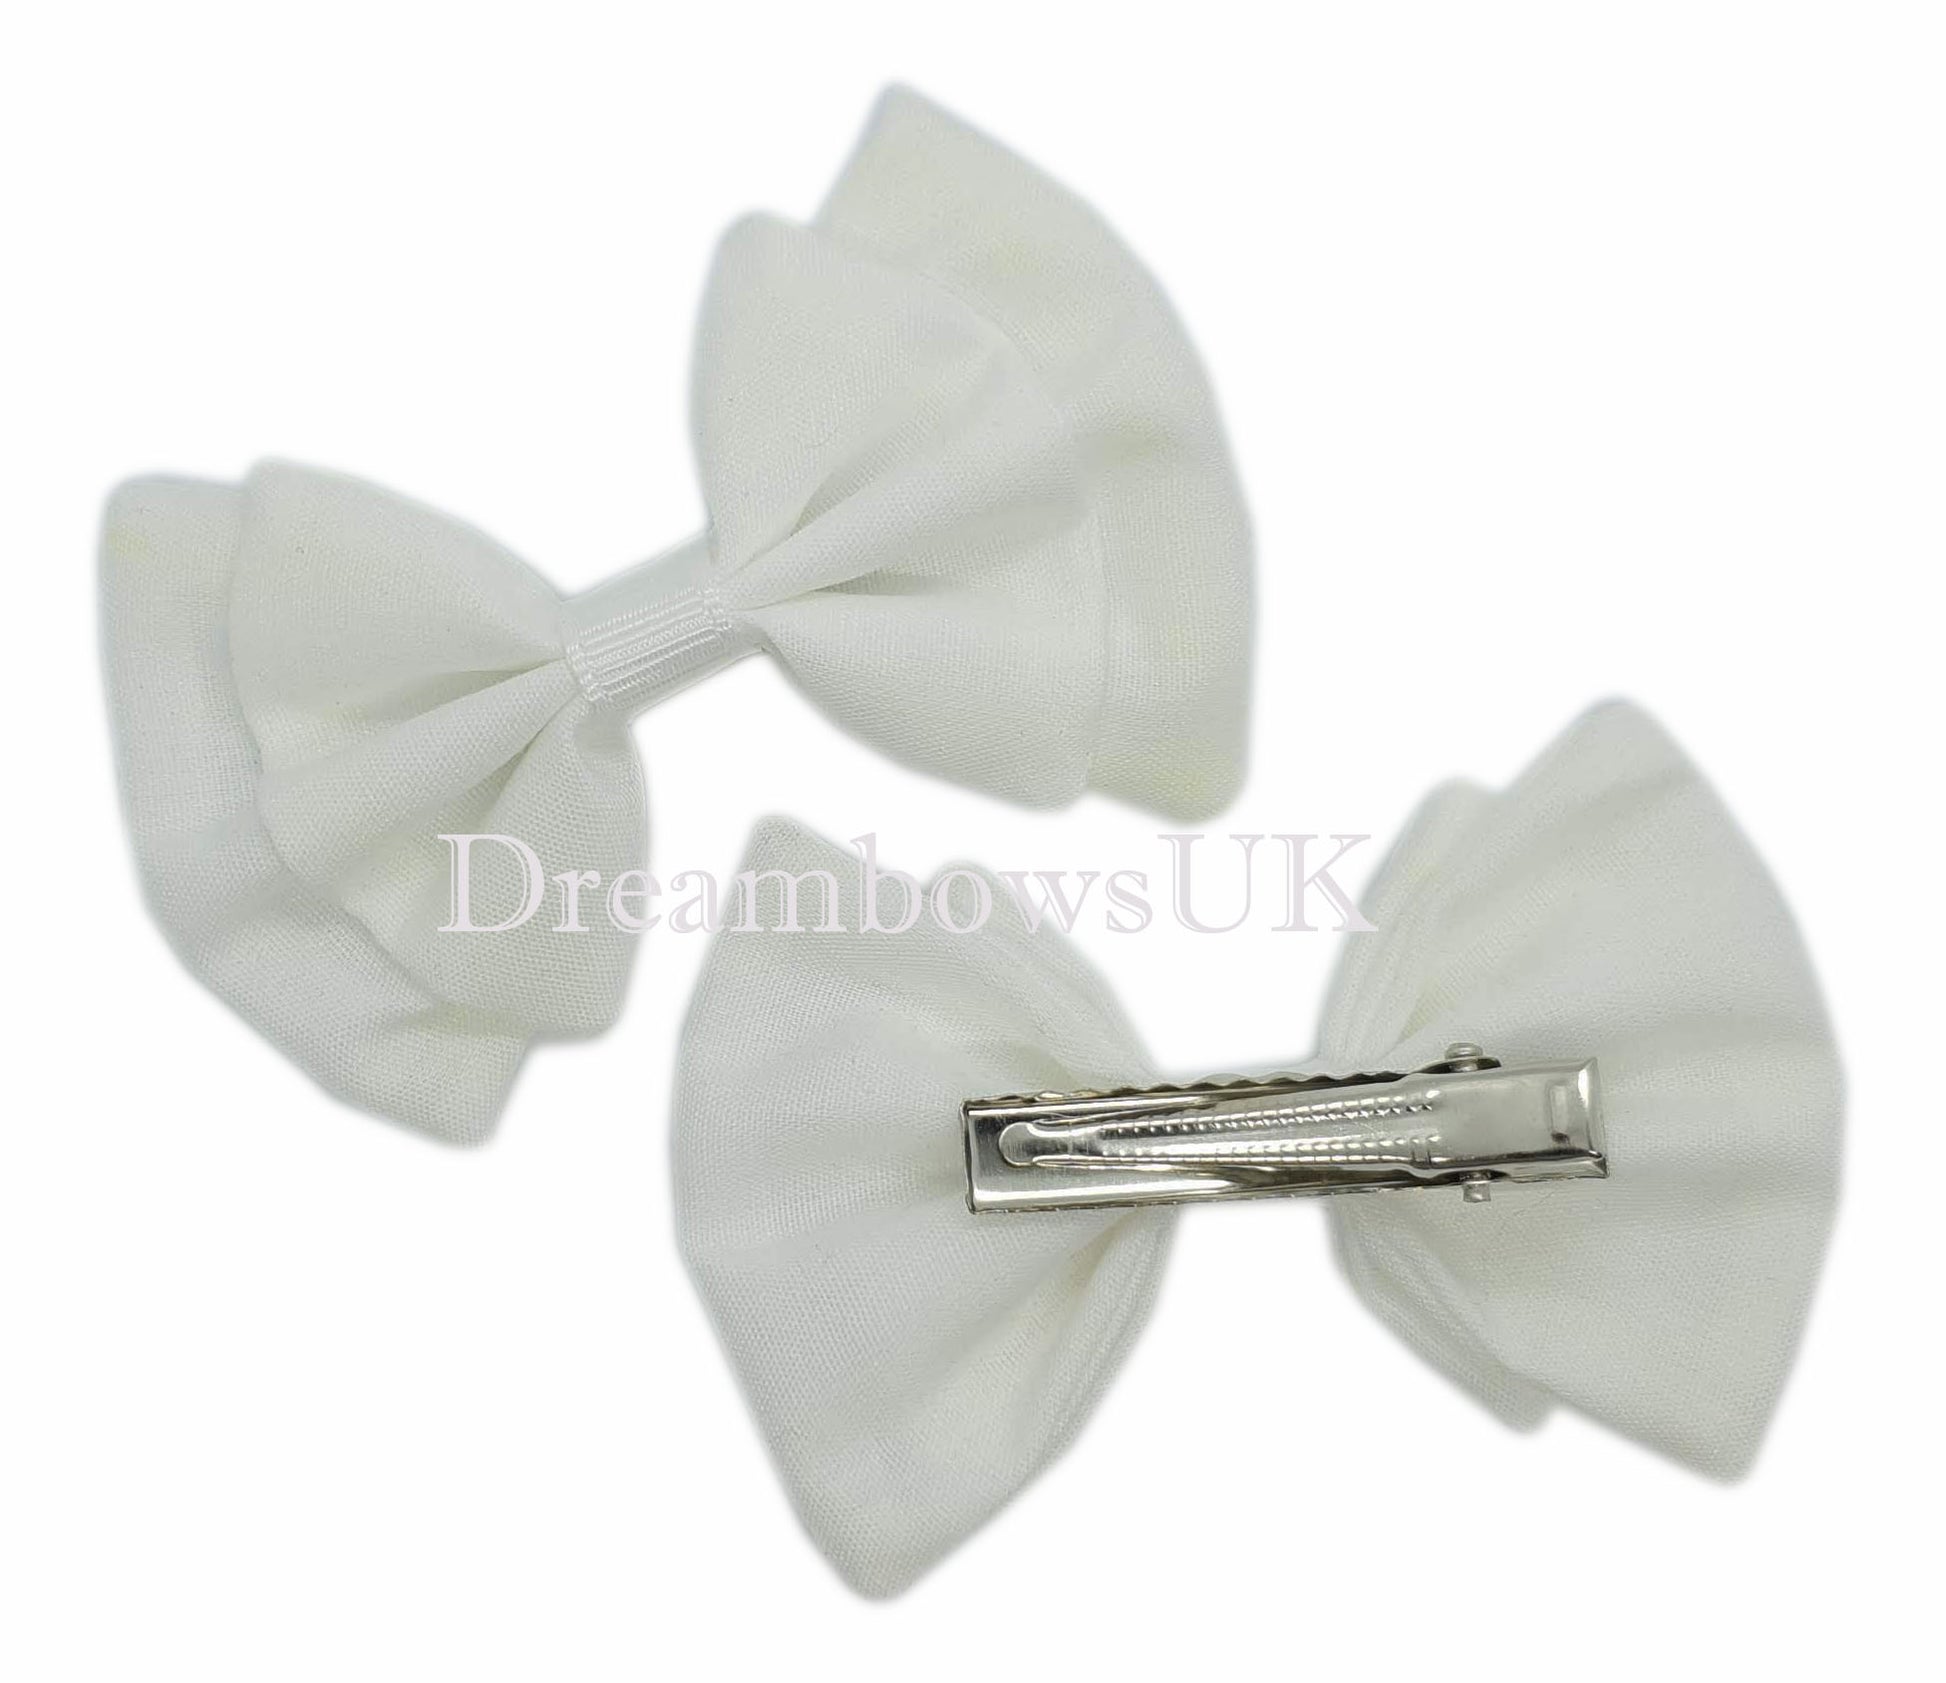 Girls white fabric hair bows on alligator clips